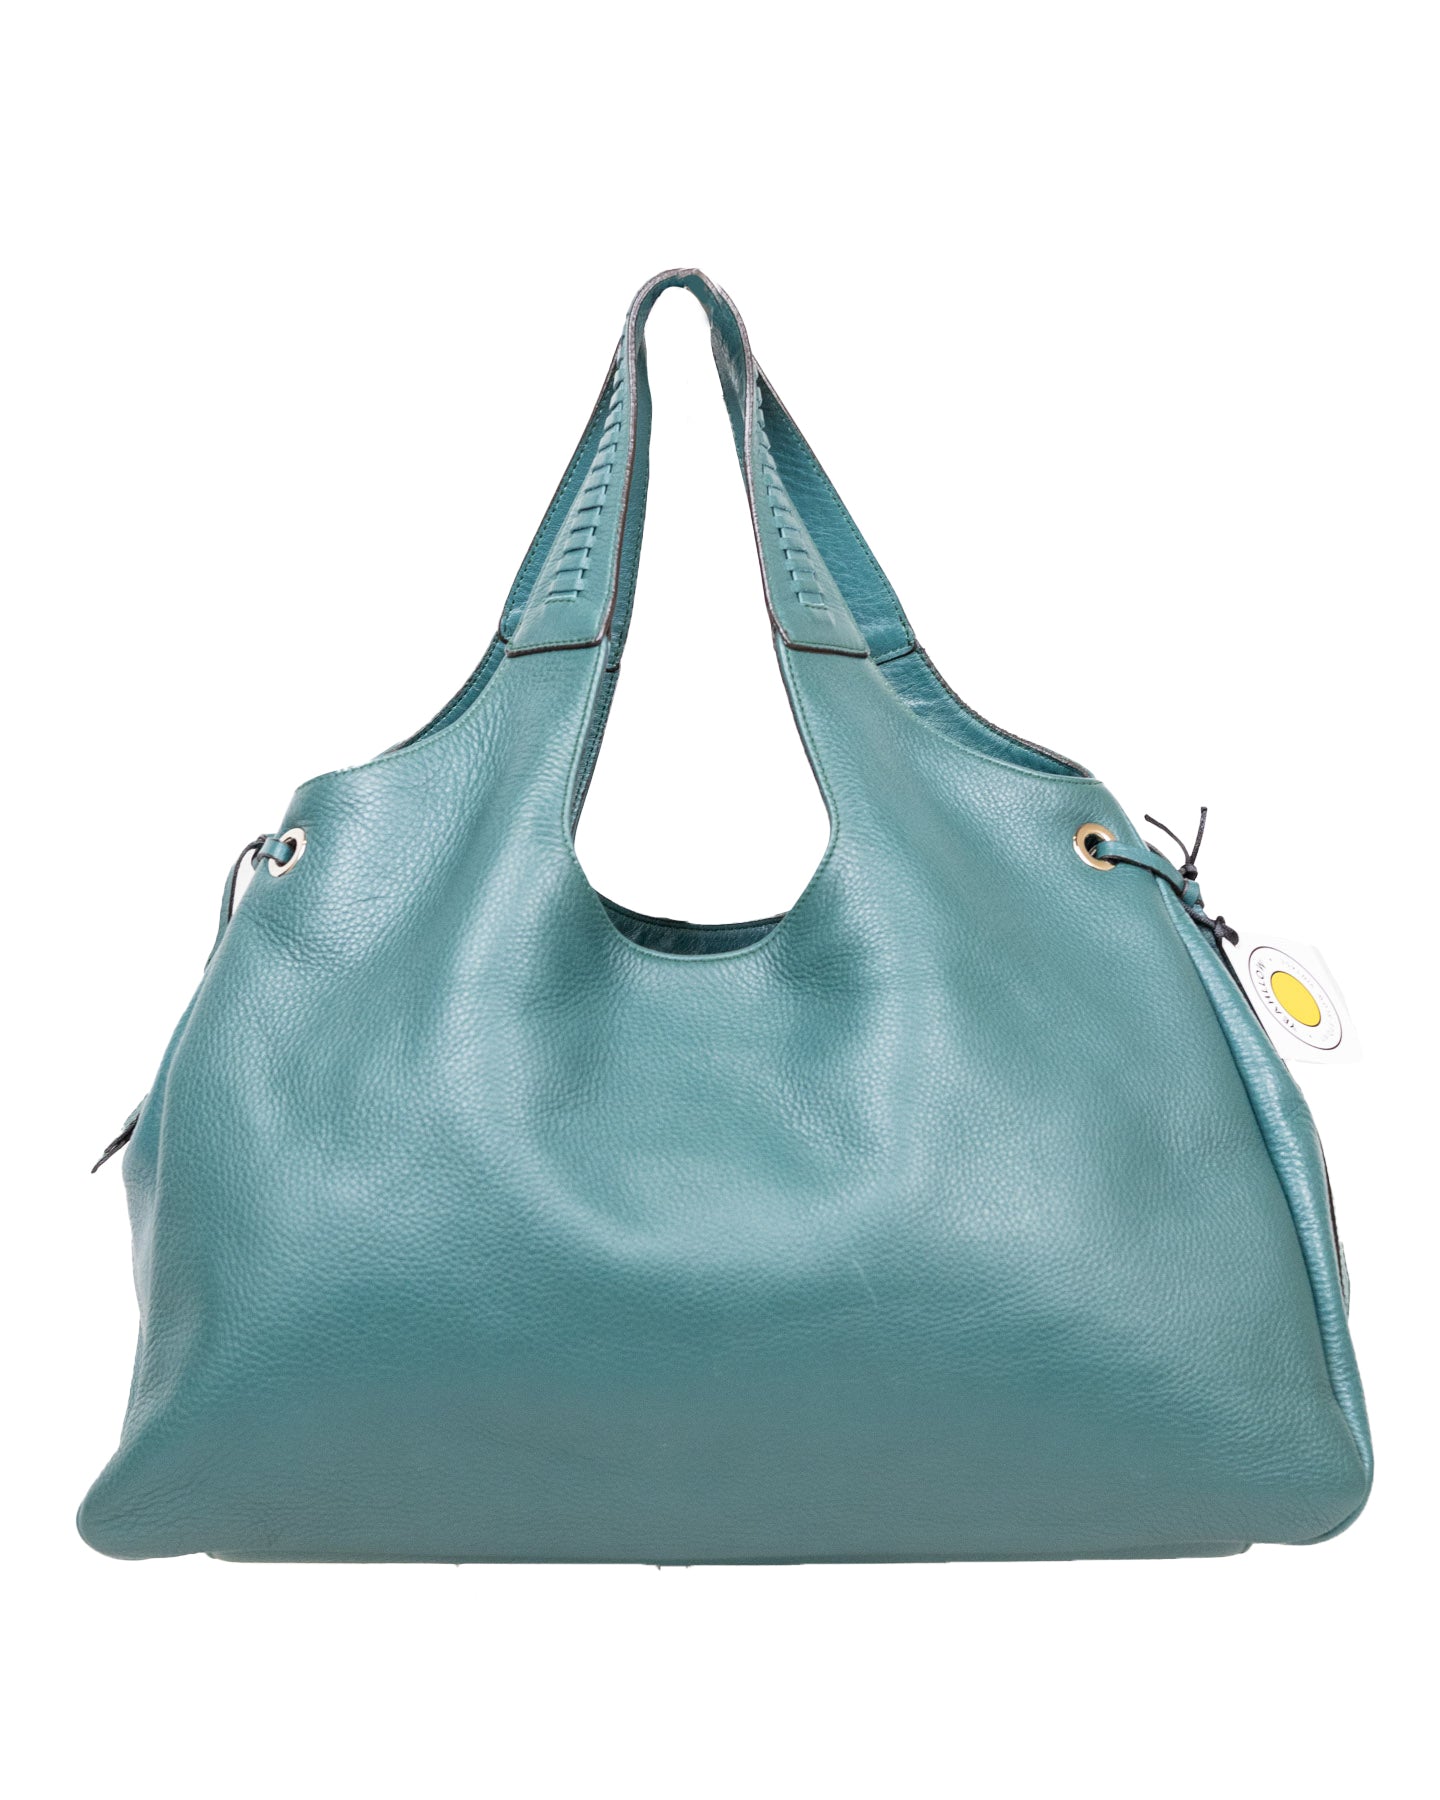 Salvatore Ferragamo Green Large Hobo Bag - with box and dust bag